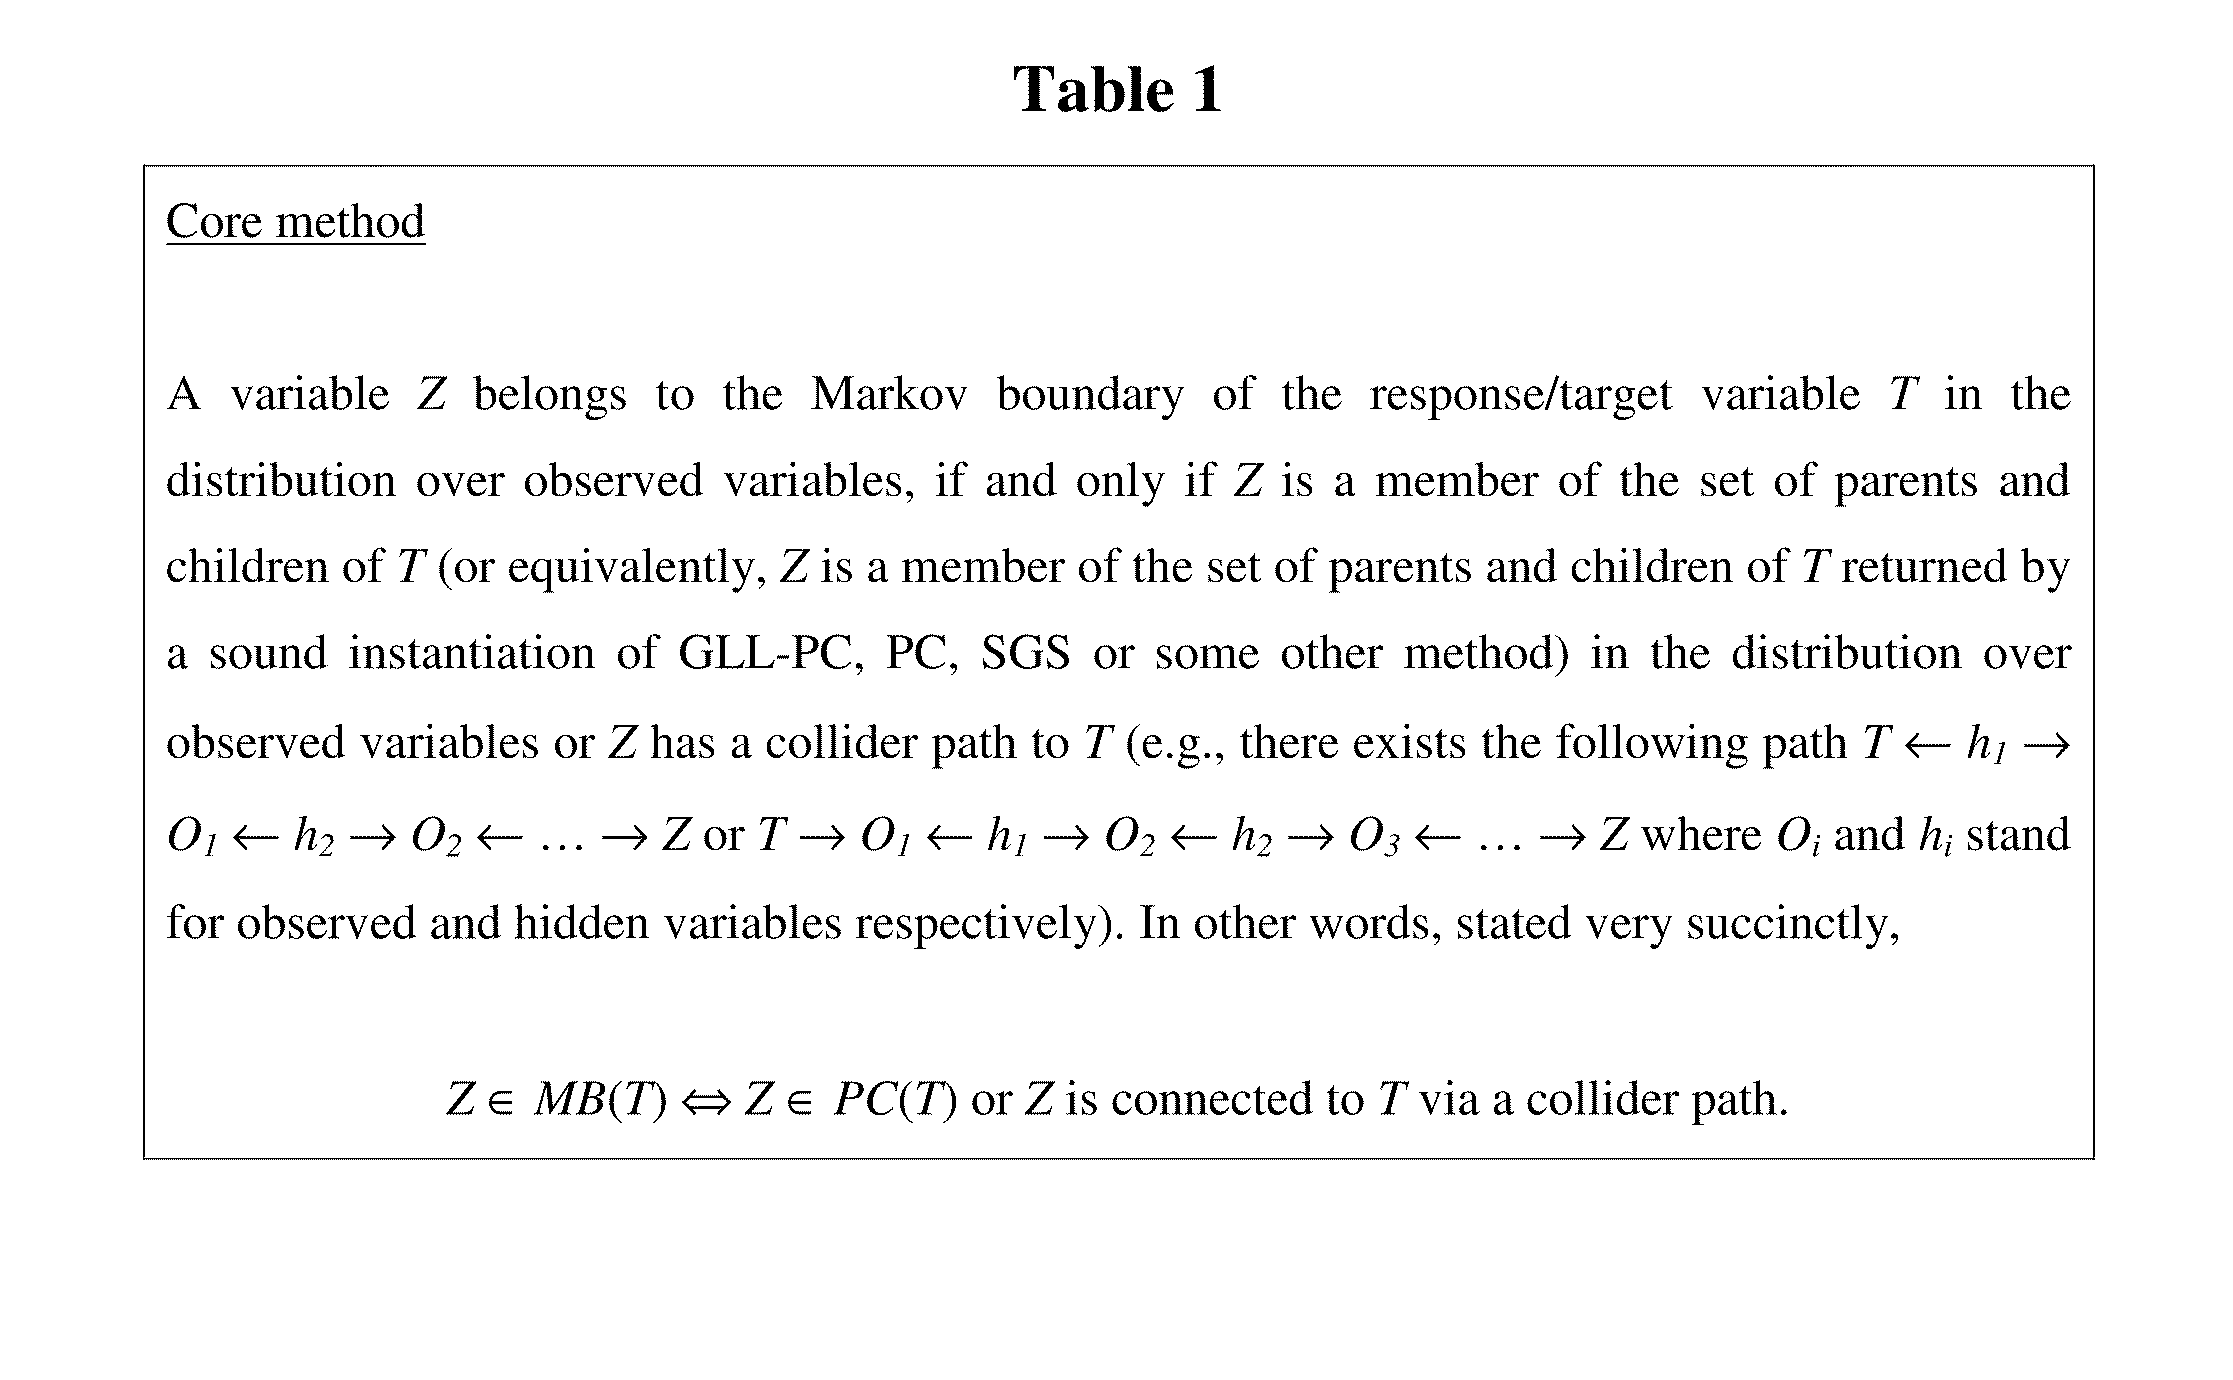 Computer Implemented Method for Discovery of Markov Boundaries from Datasets with Hidden Variables